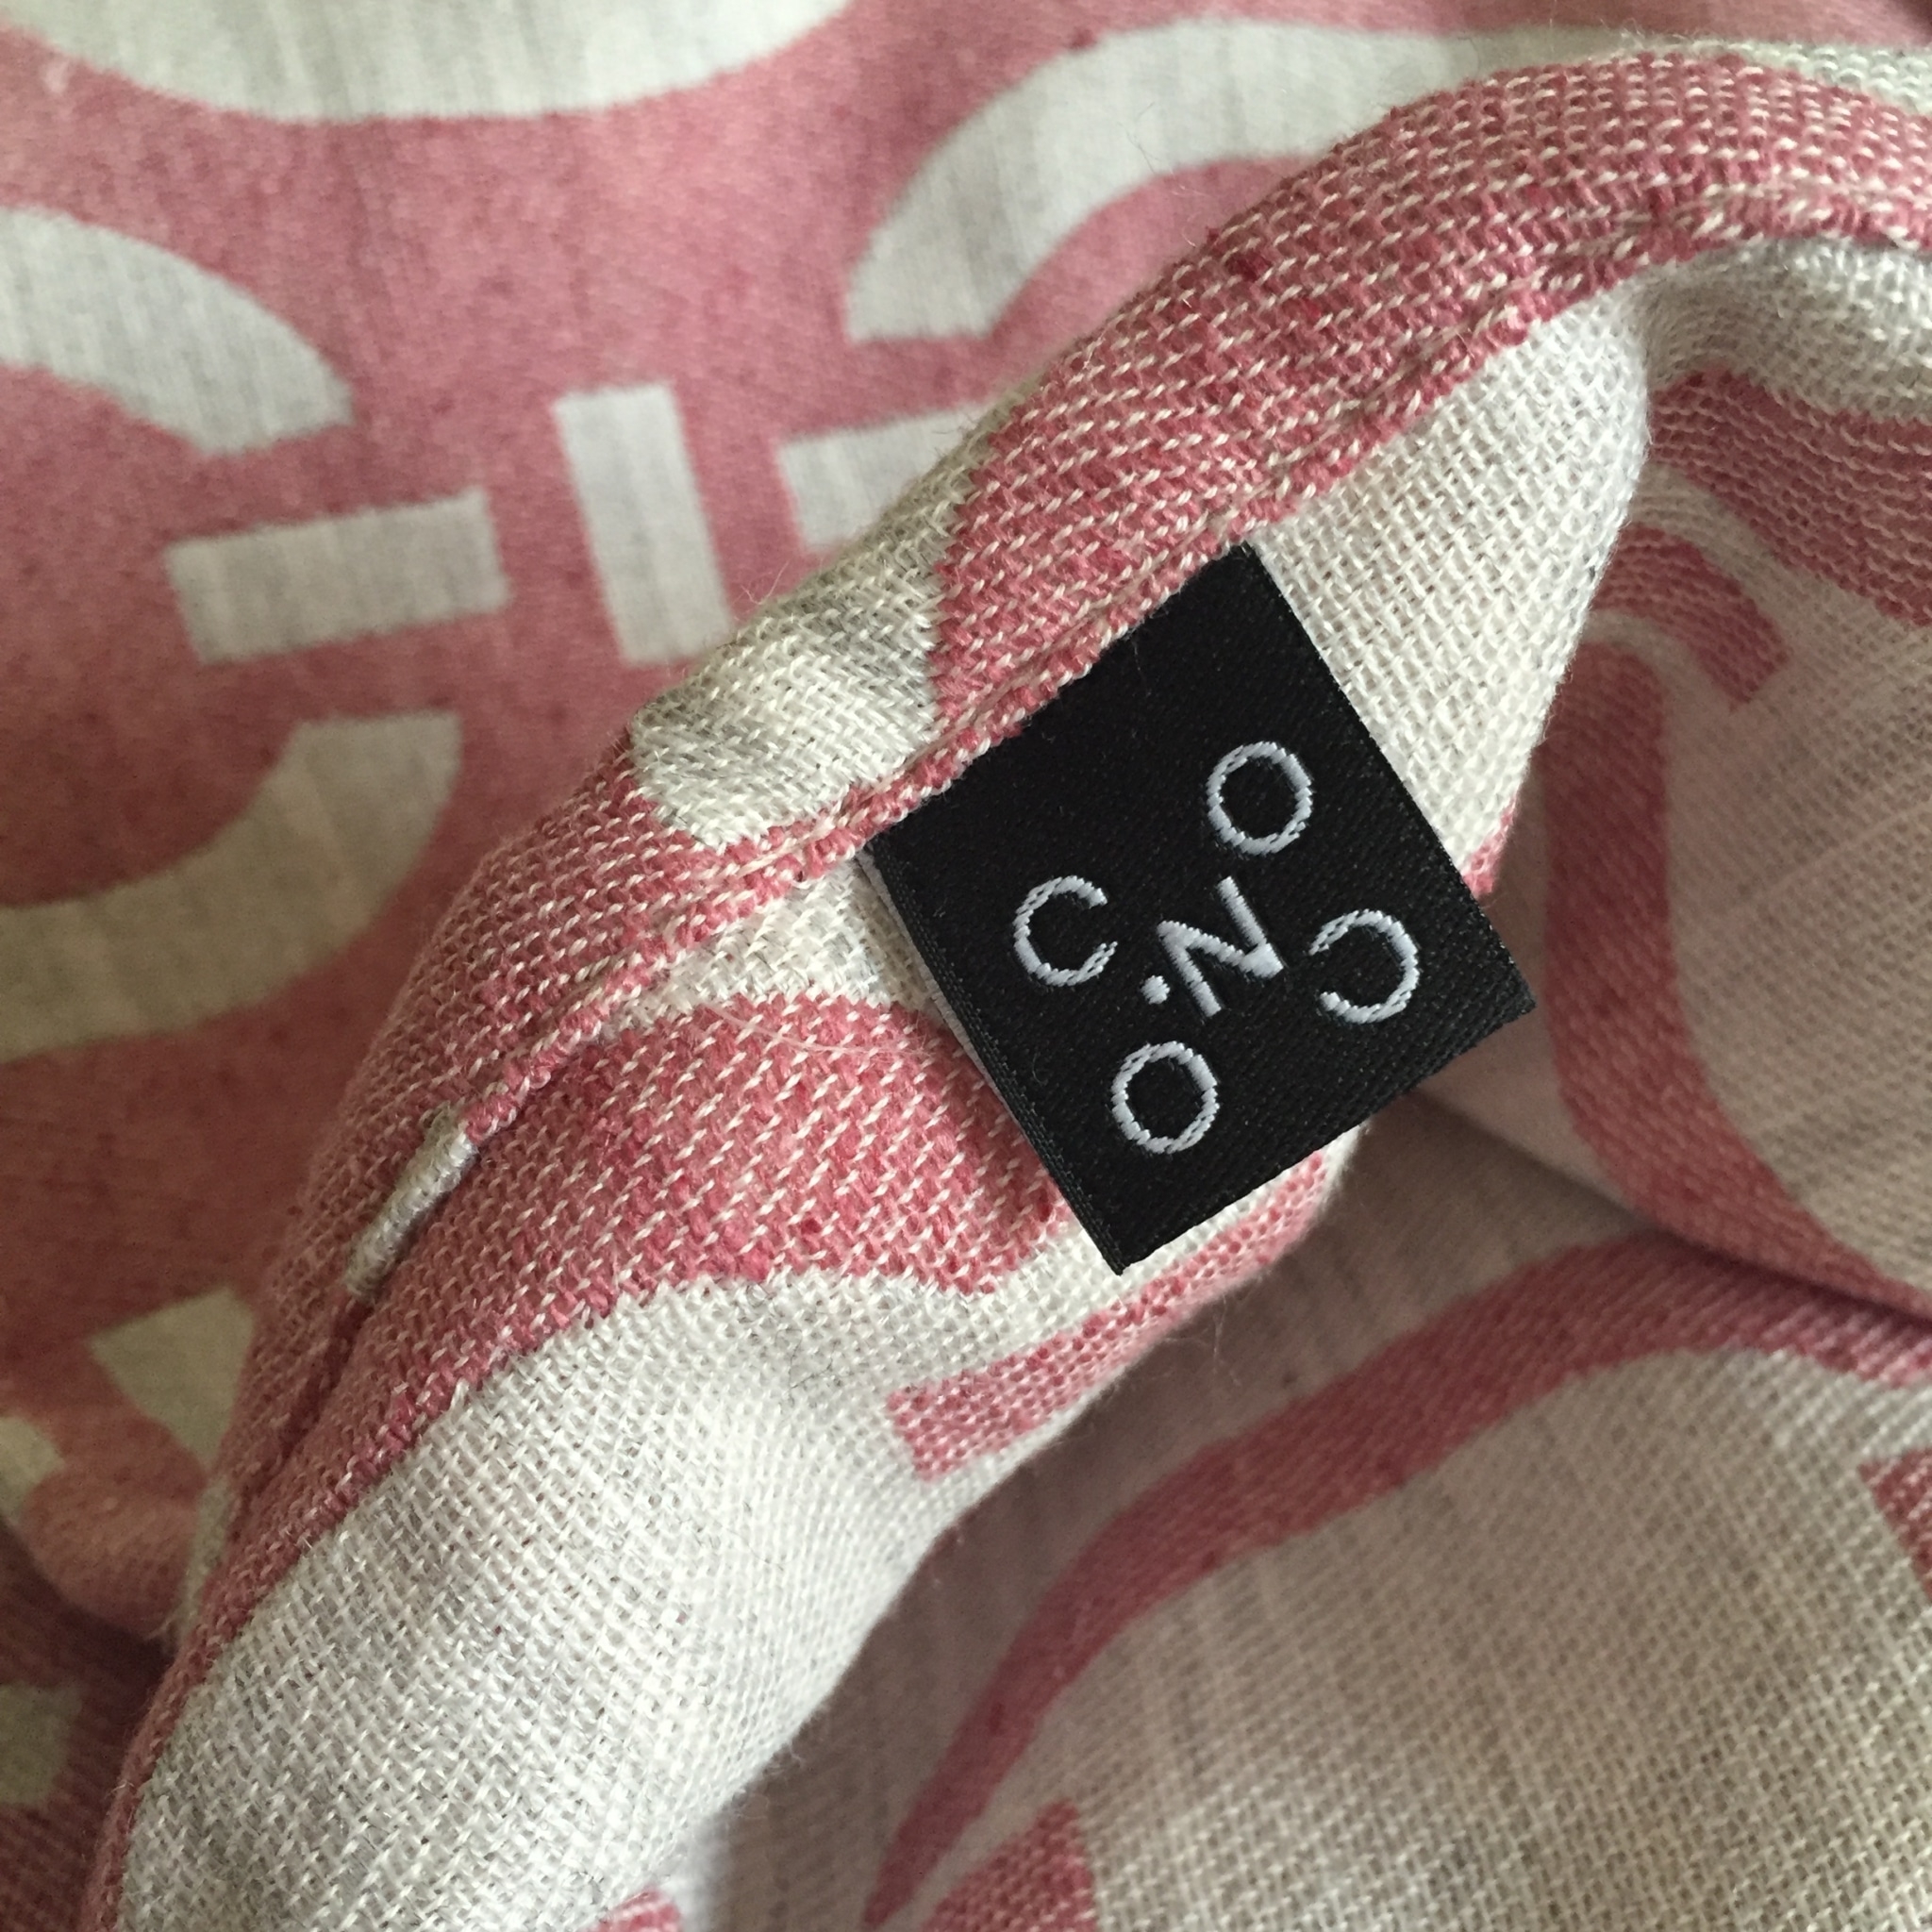 Coco-N Logo on the baby wrap